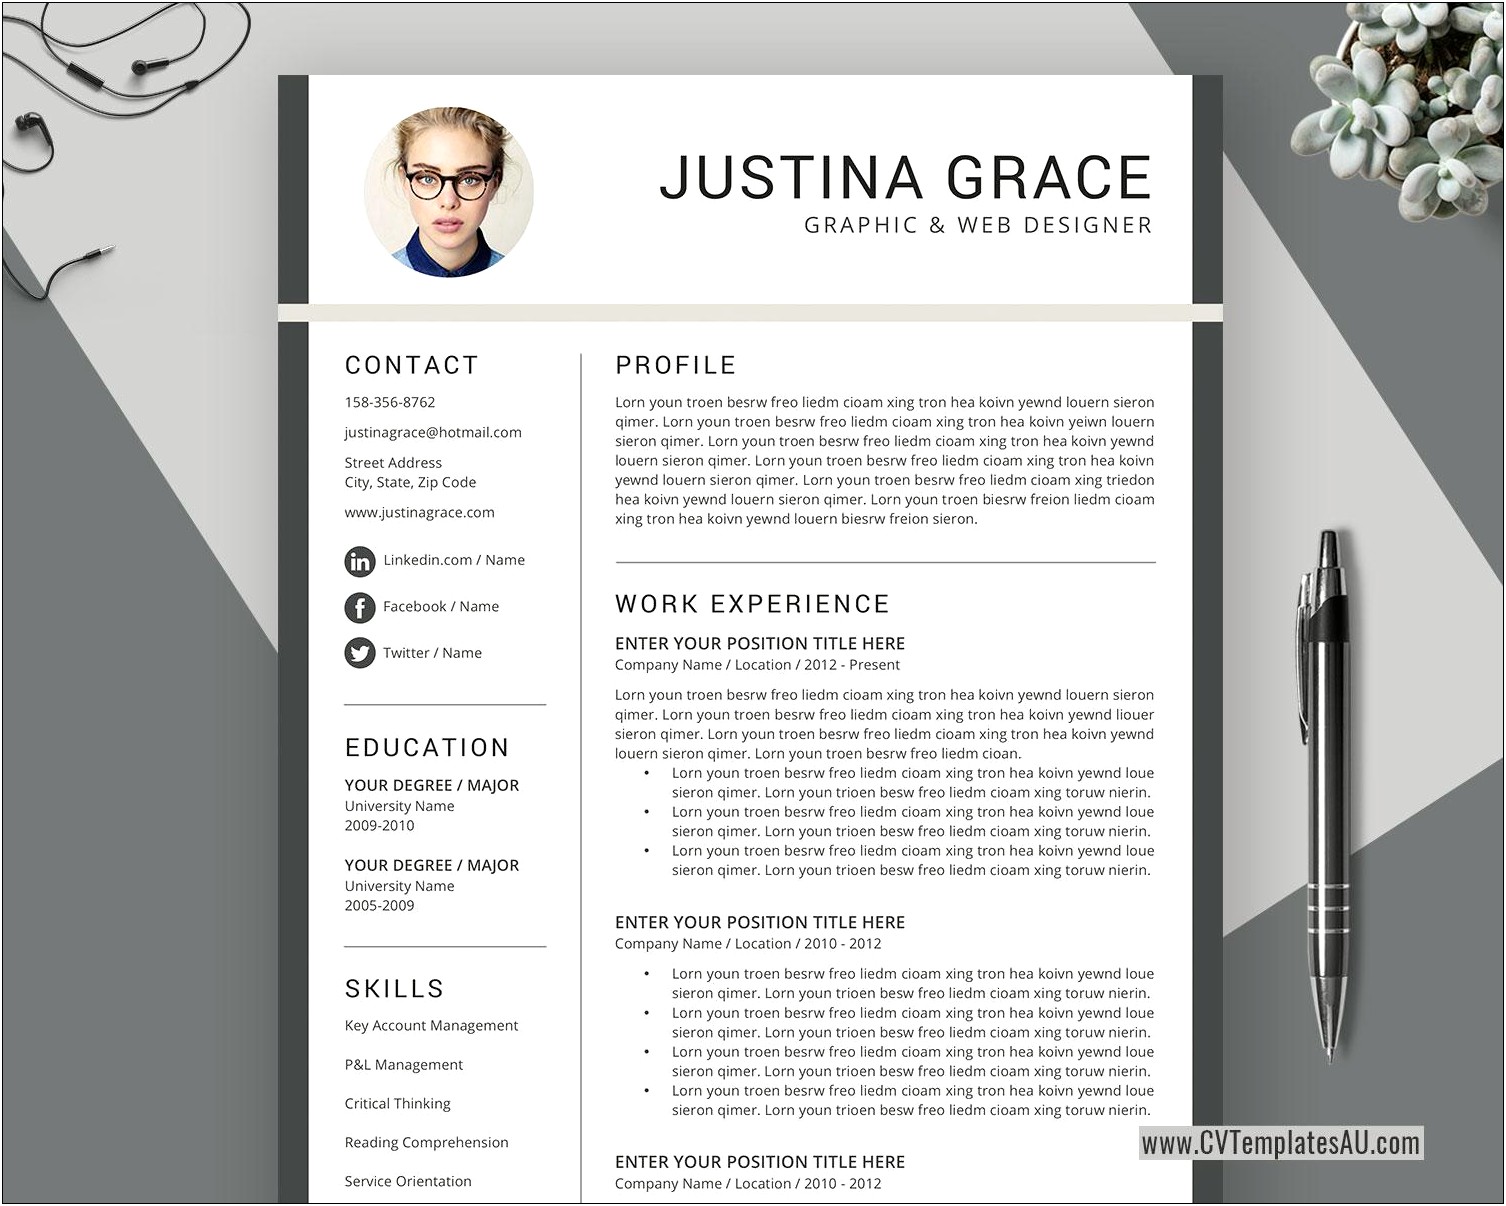 Format For A Resume On Microsoft Word